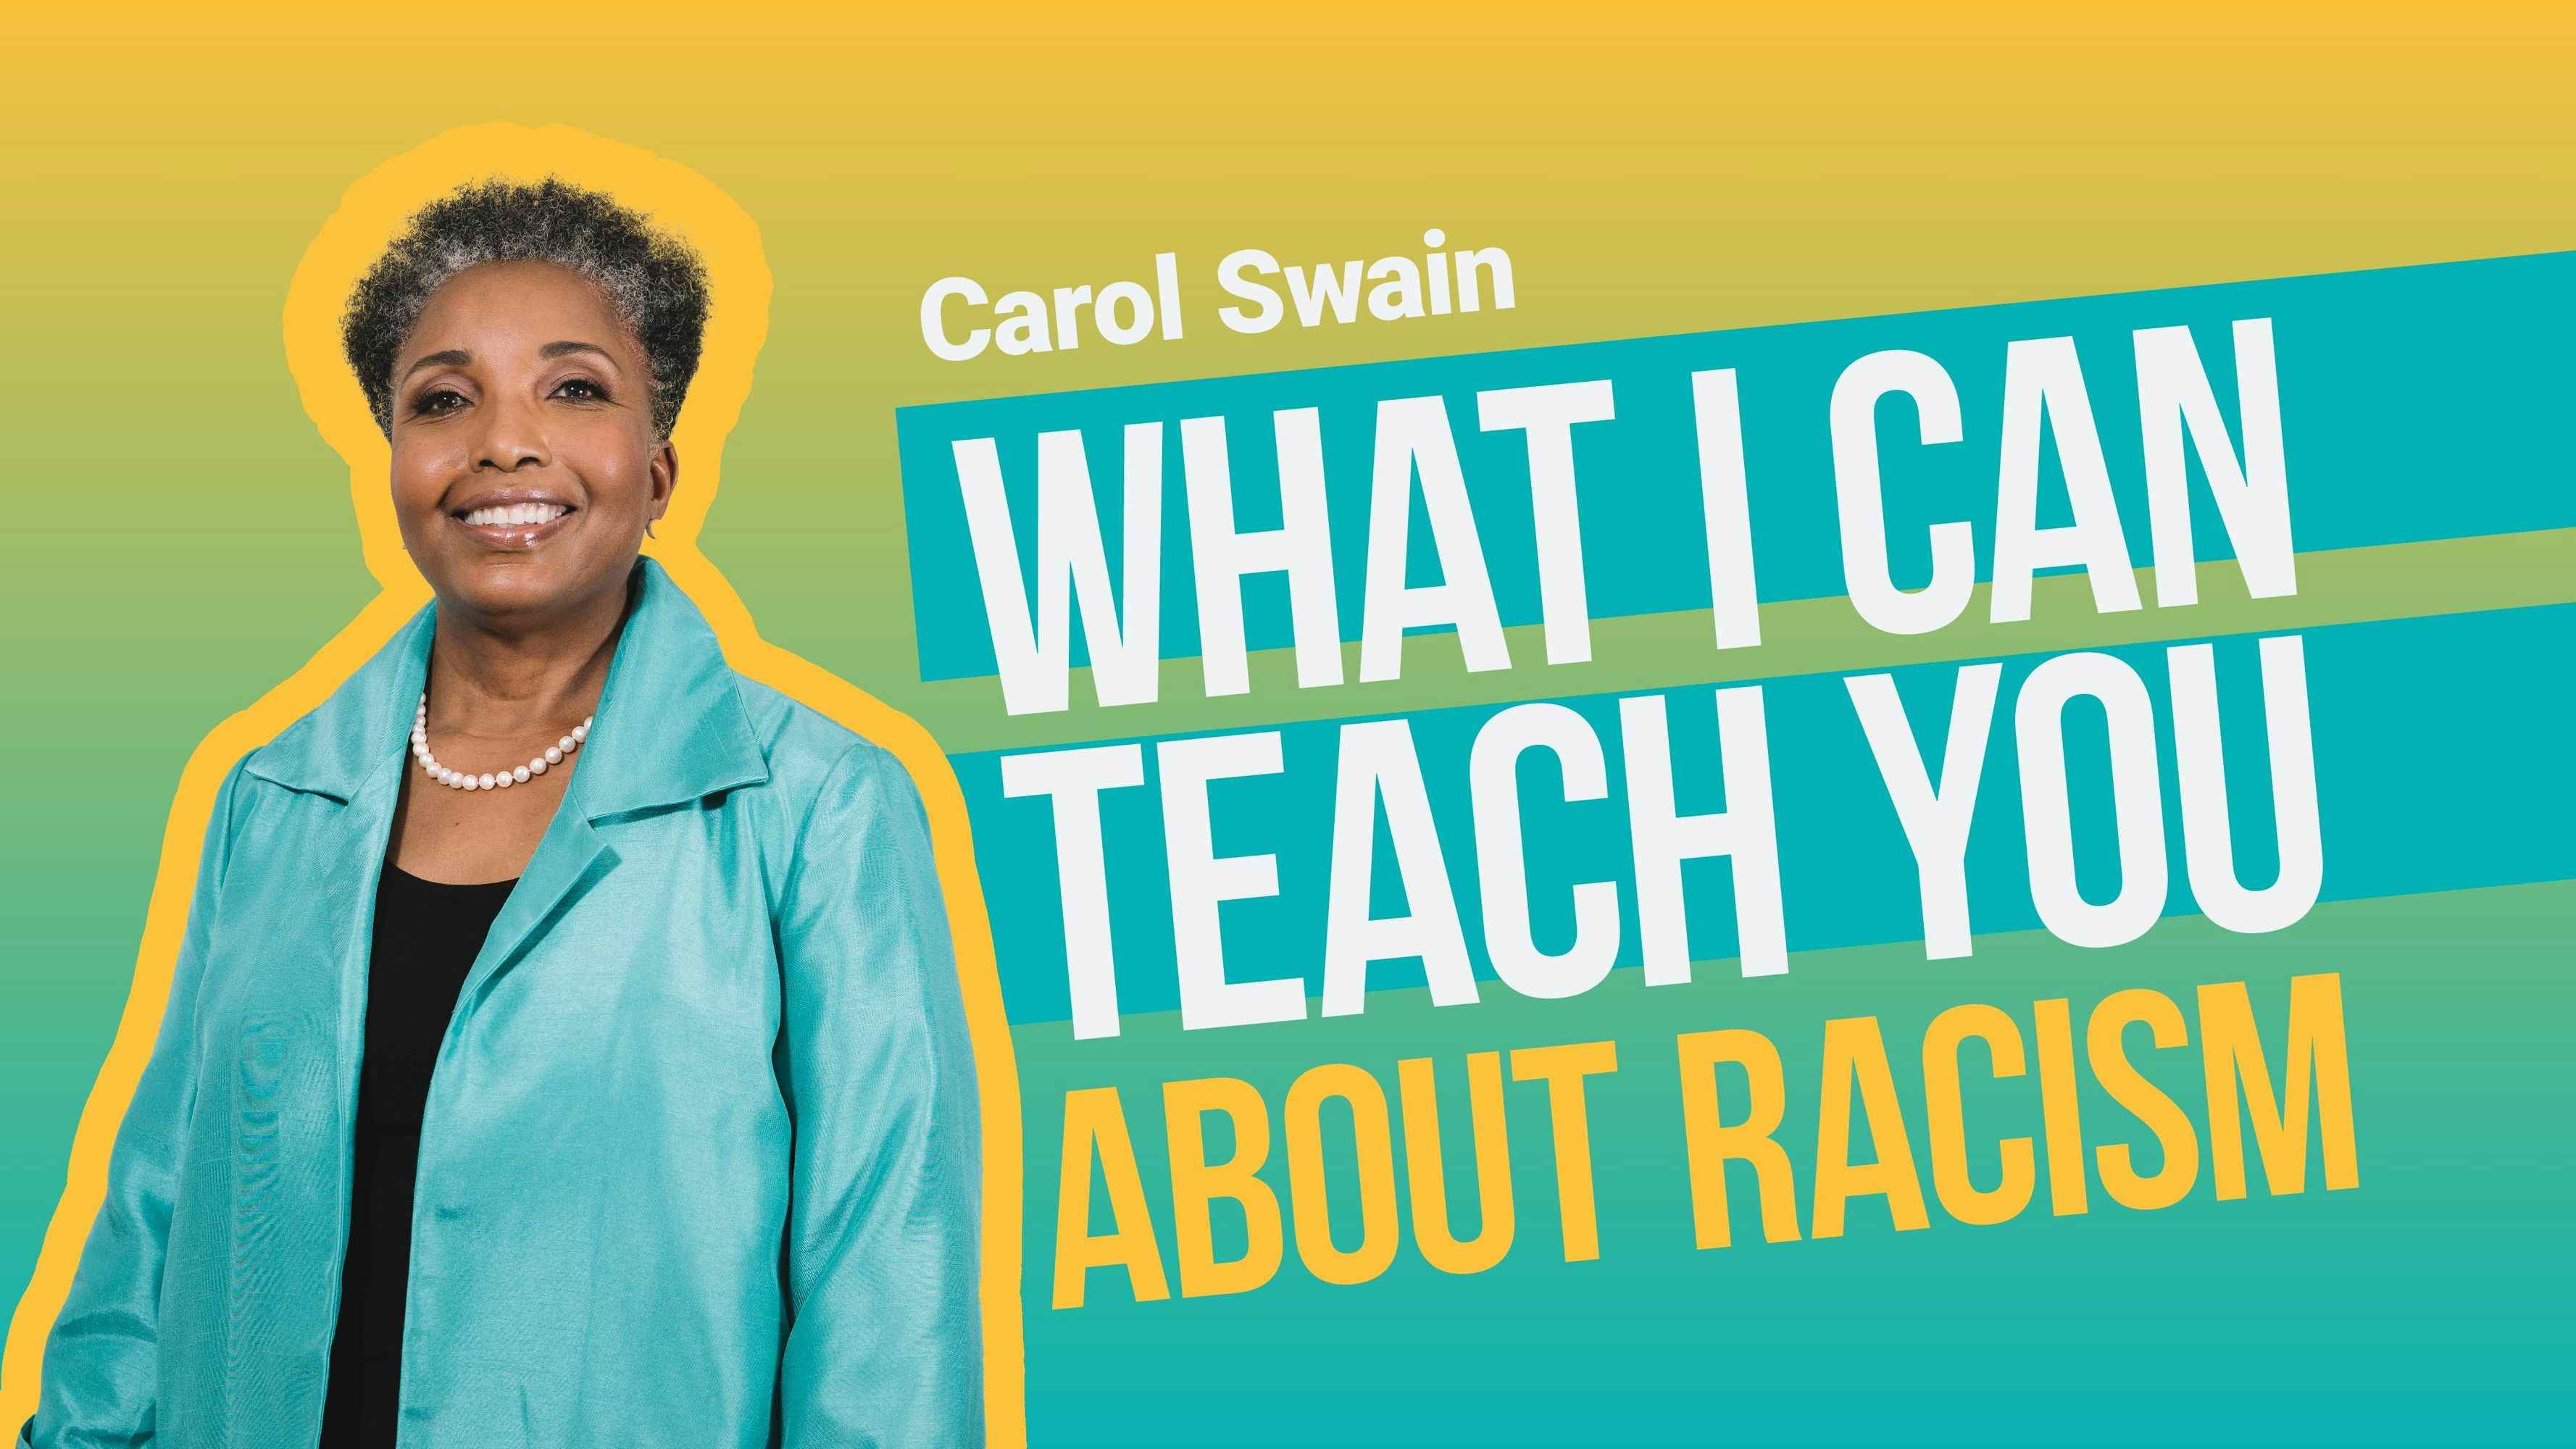 What I Can Teach You About Racism